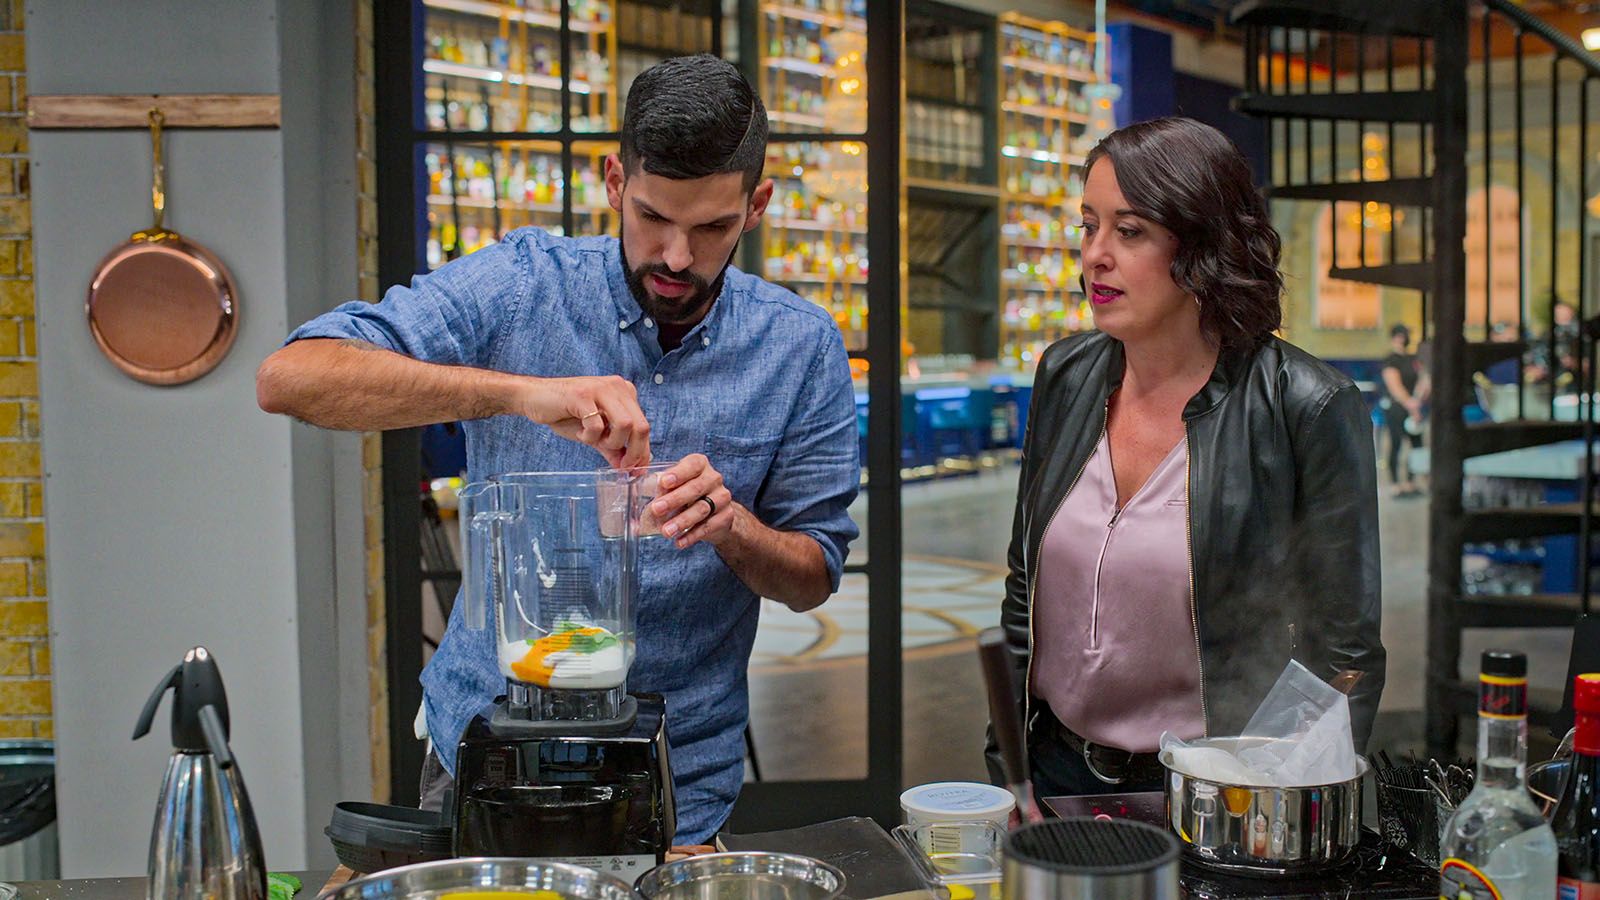 Raj Shukla competes on the new Netflix show "Drink Masters."